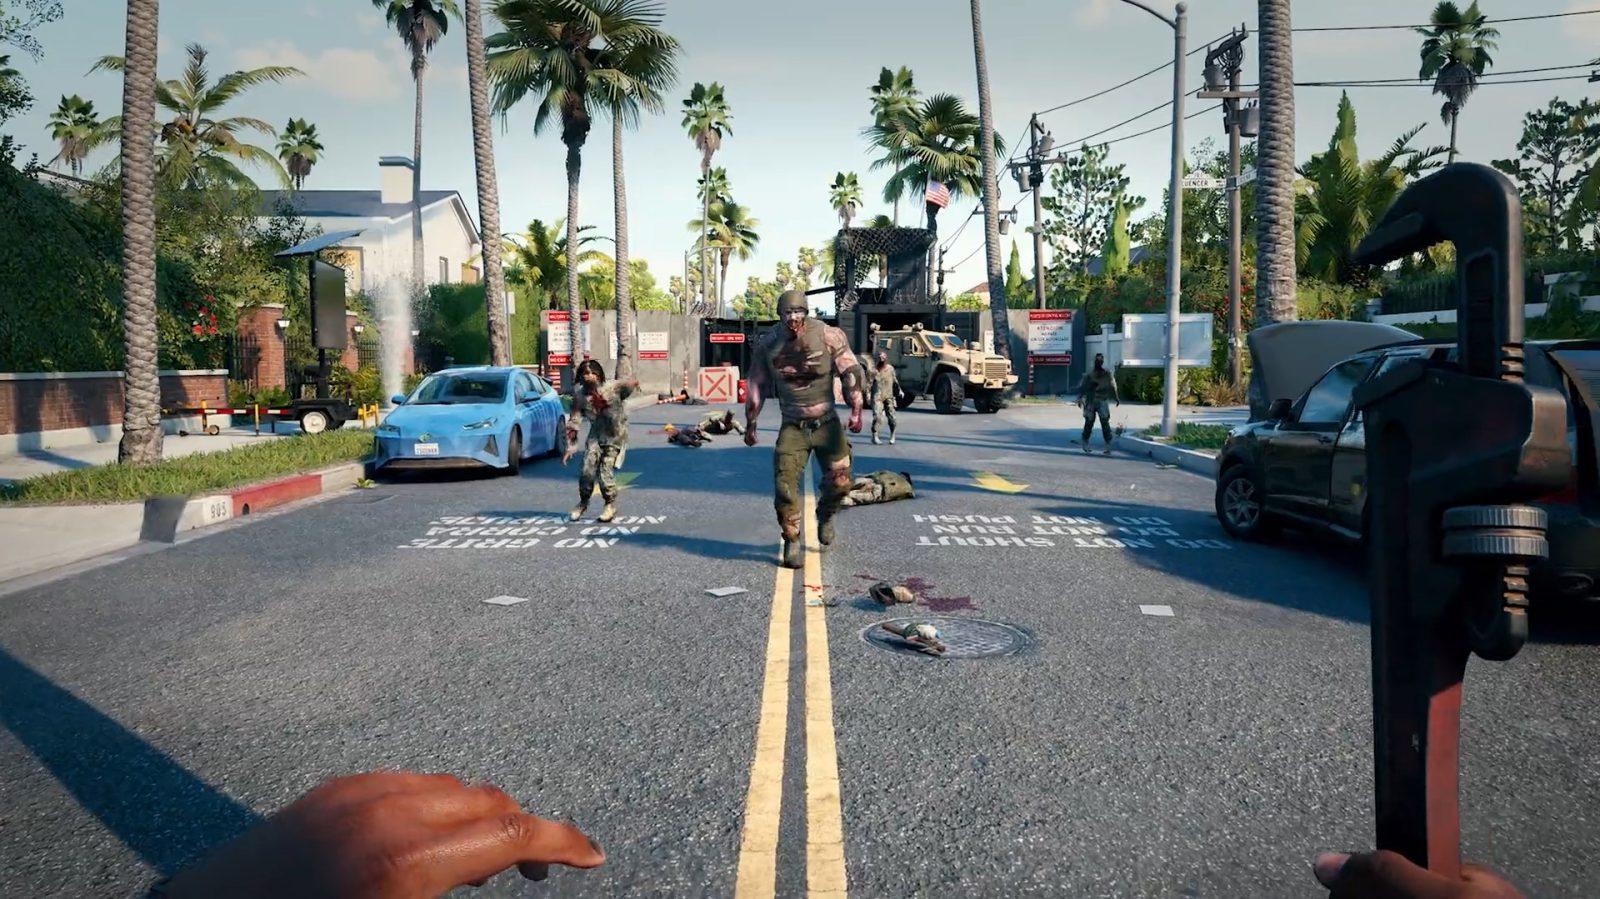 Dead Island 2s launch date has been moved up one week   GAMING TREND